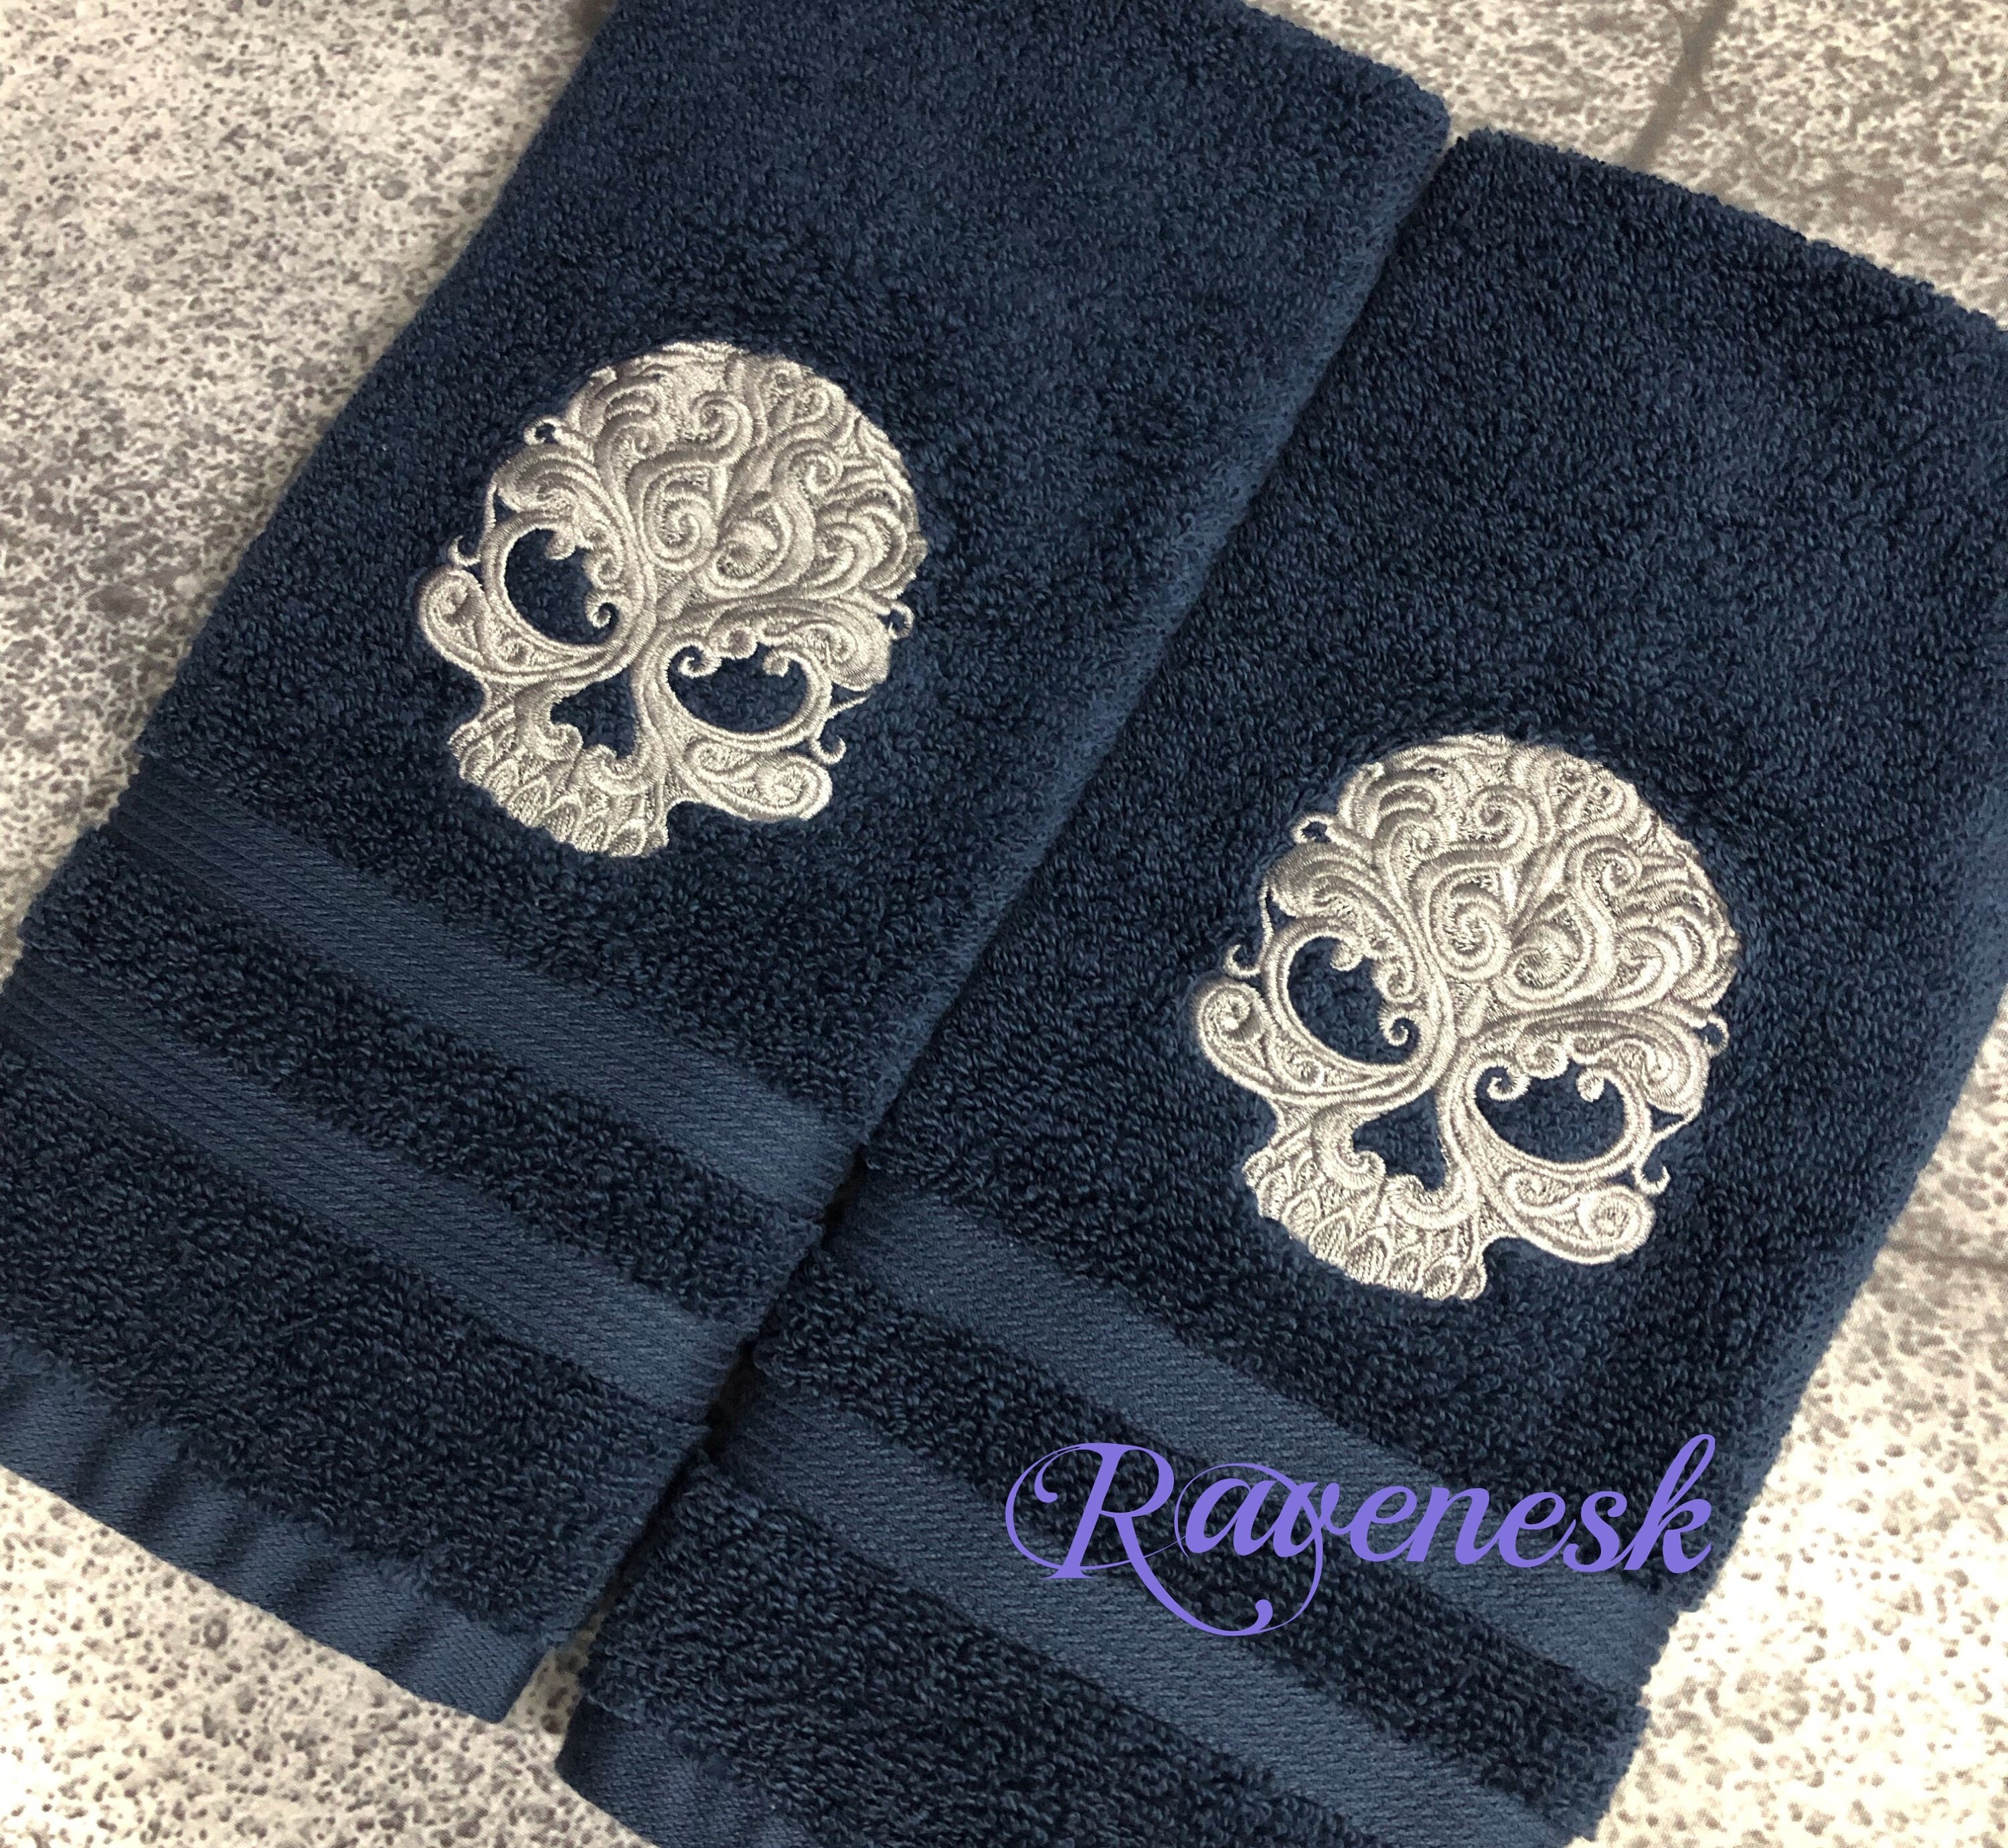 GHOSTLY SKULL BEAUTY SET OF 2 HAND TOWELS EMBROIDERED by laura 